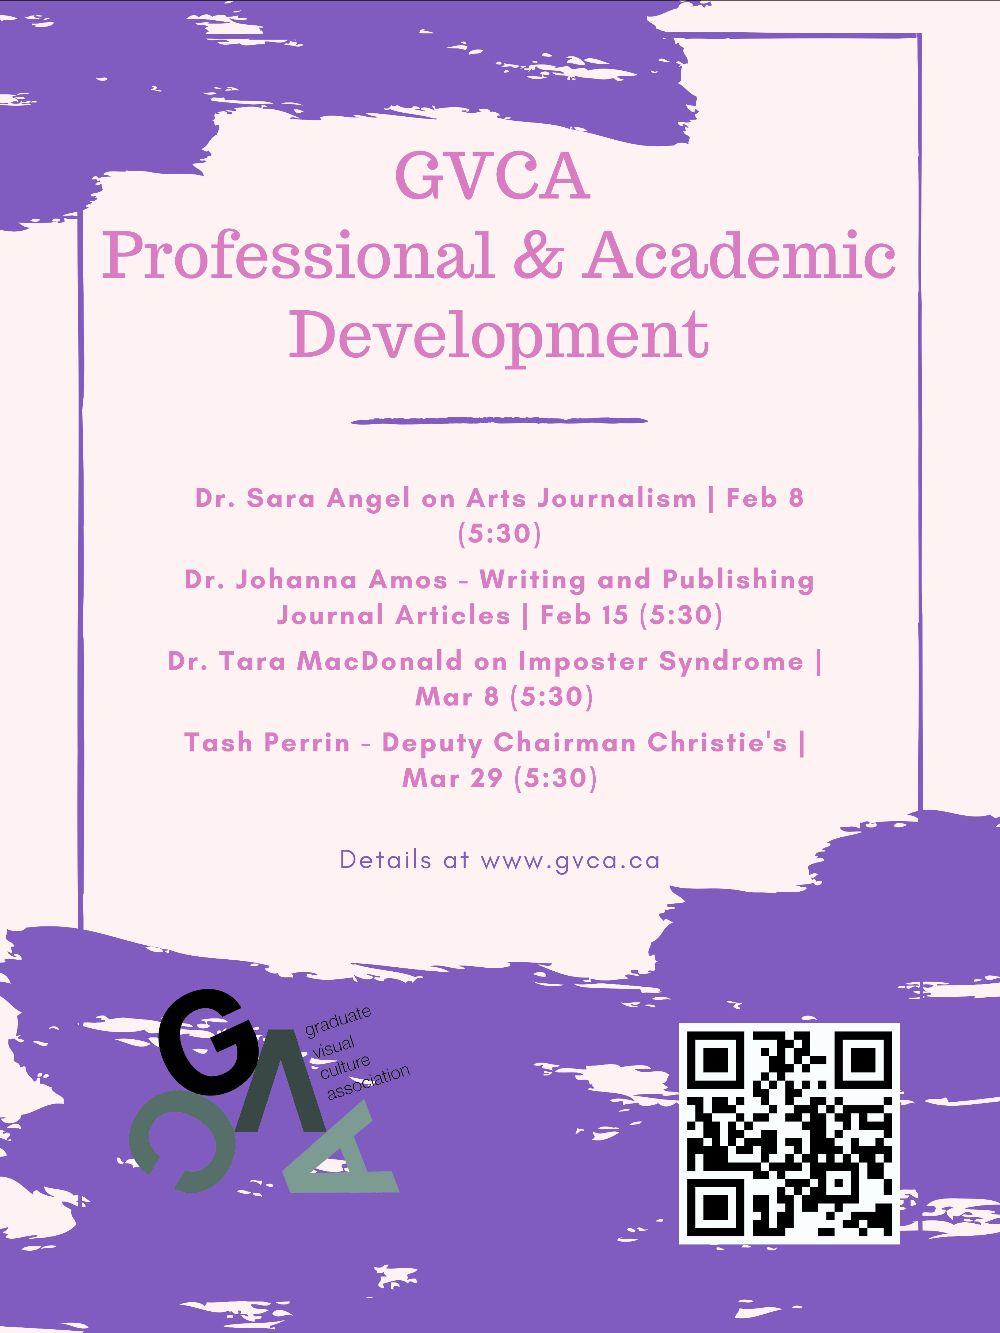 Poster for GVCA's Professional & Academic Development events